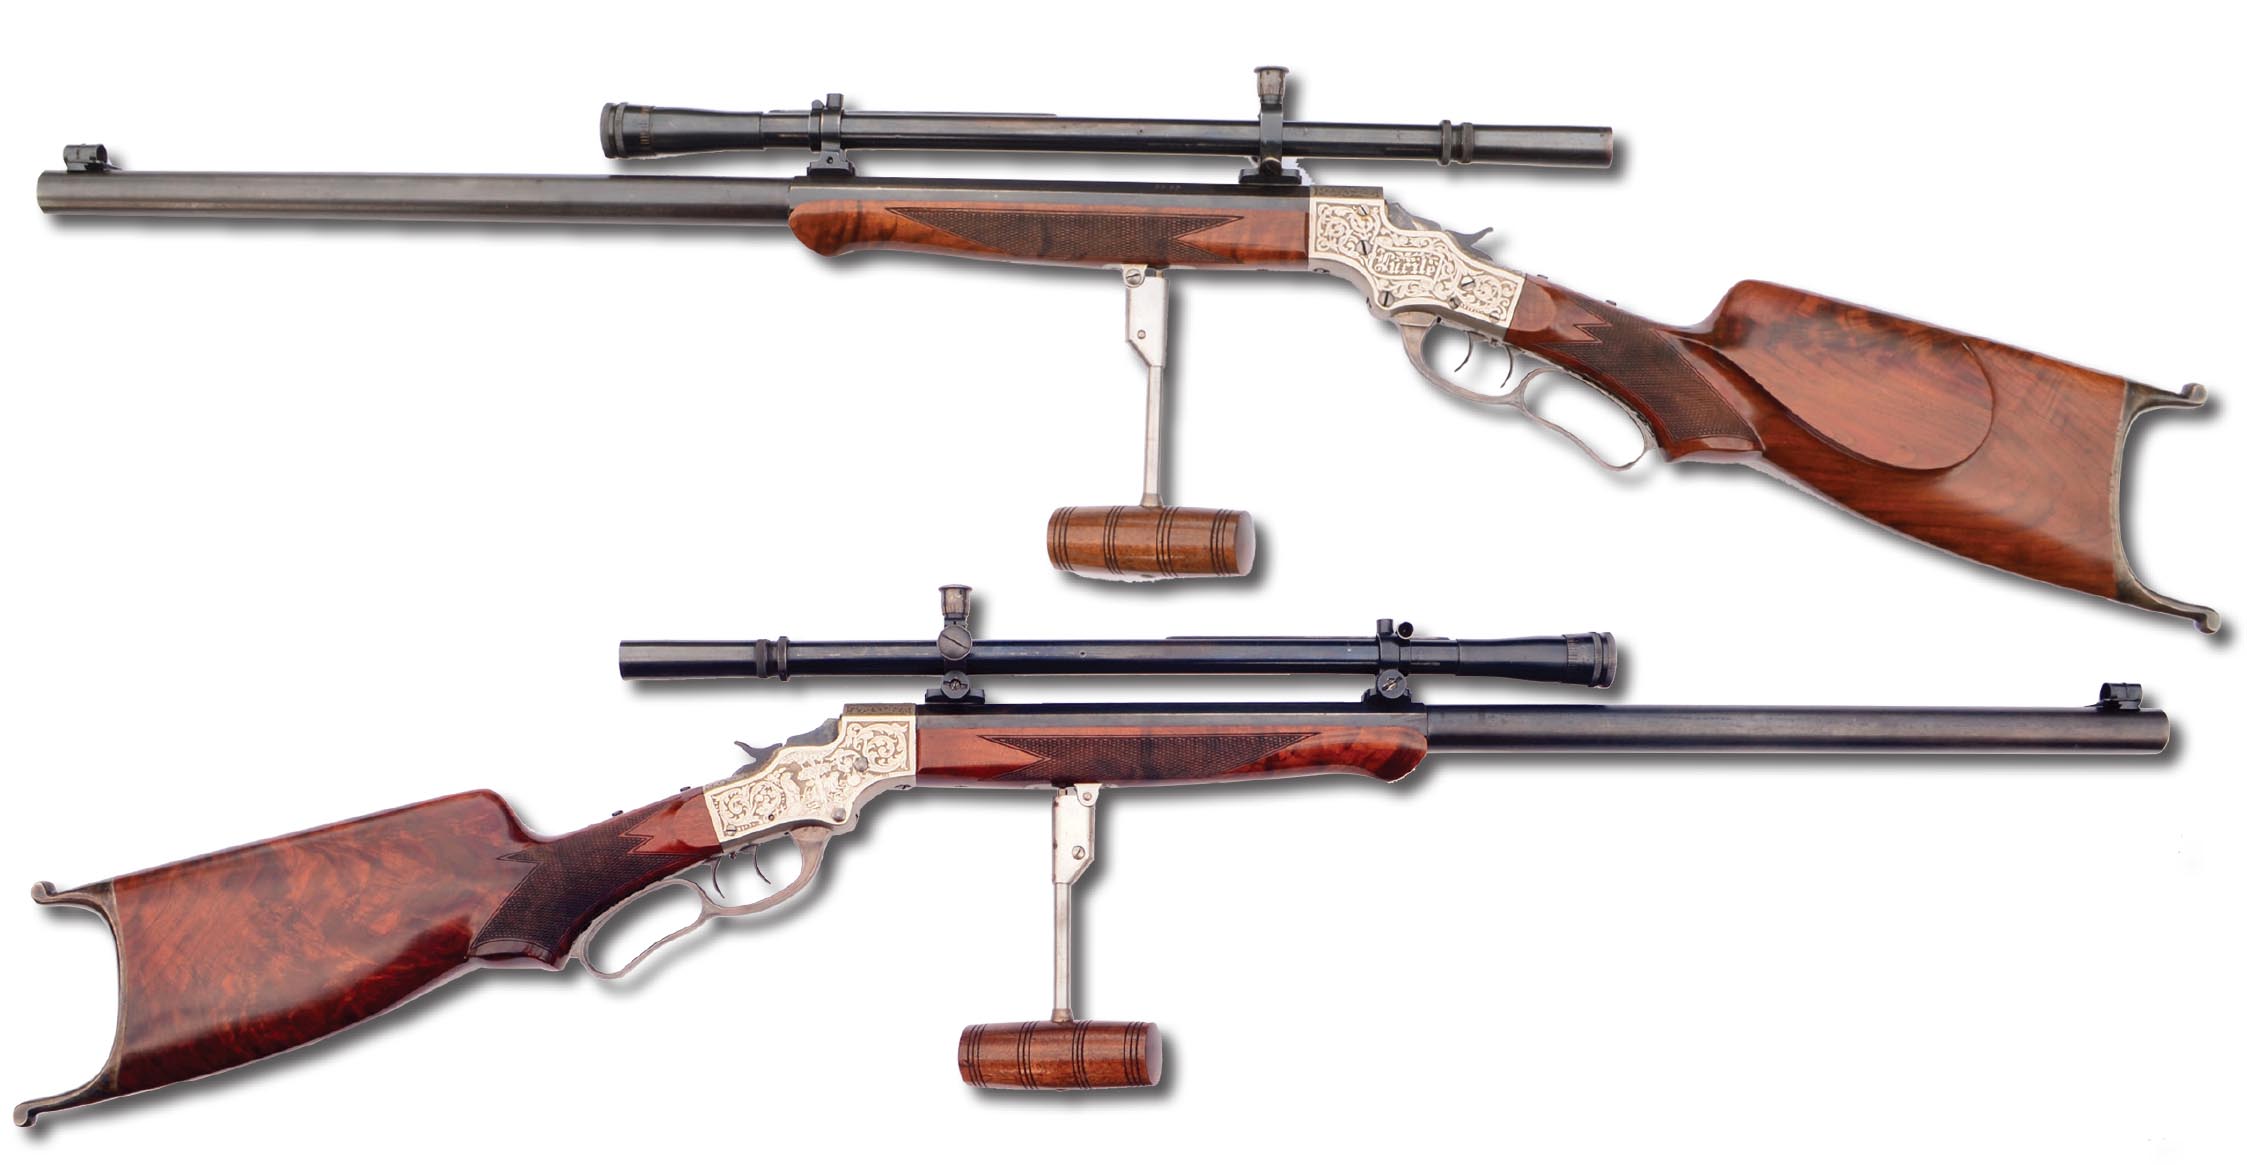 “Lucile” is a Stevens Model 52, circa 1901-1903. The Model 52 was one of the highest grade Schützen rifles, complete with palm rest, double set triggers and heavy barrel. The scope, a Lyman 8x Junior Targetspot, was added later.